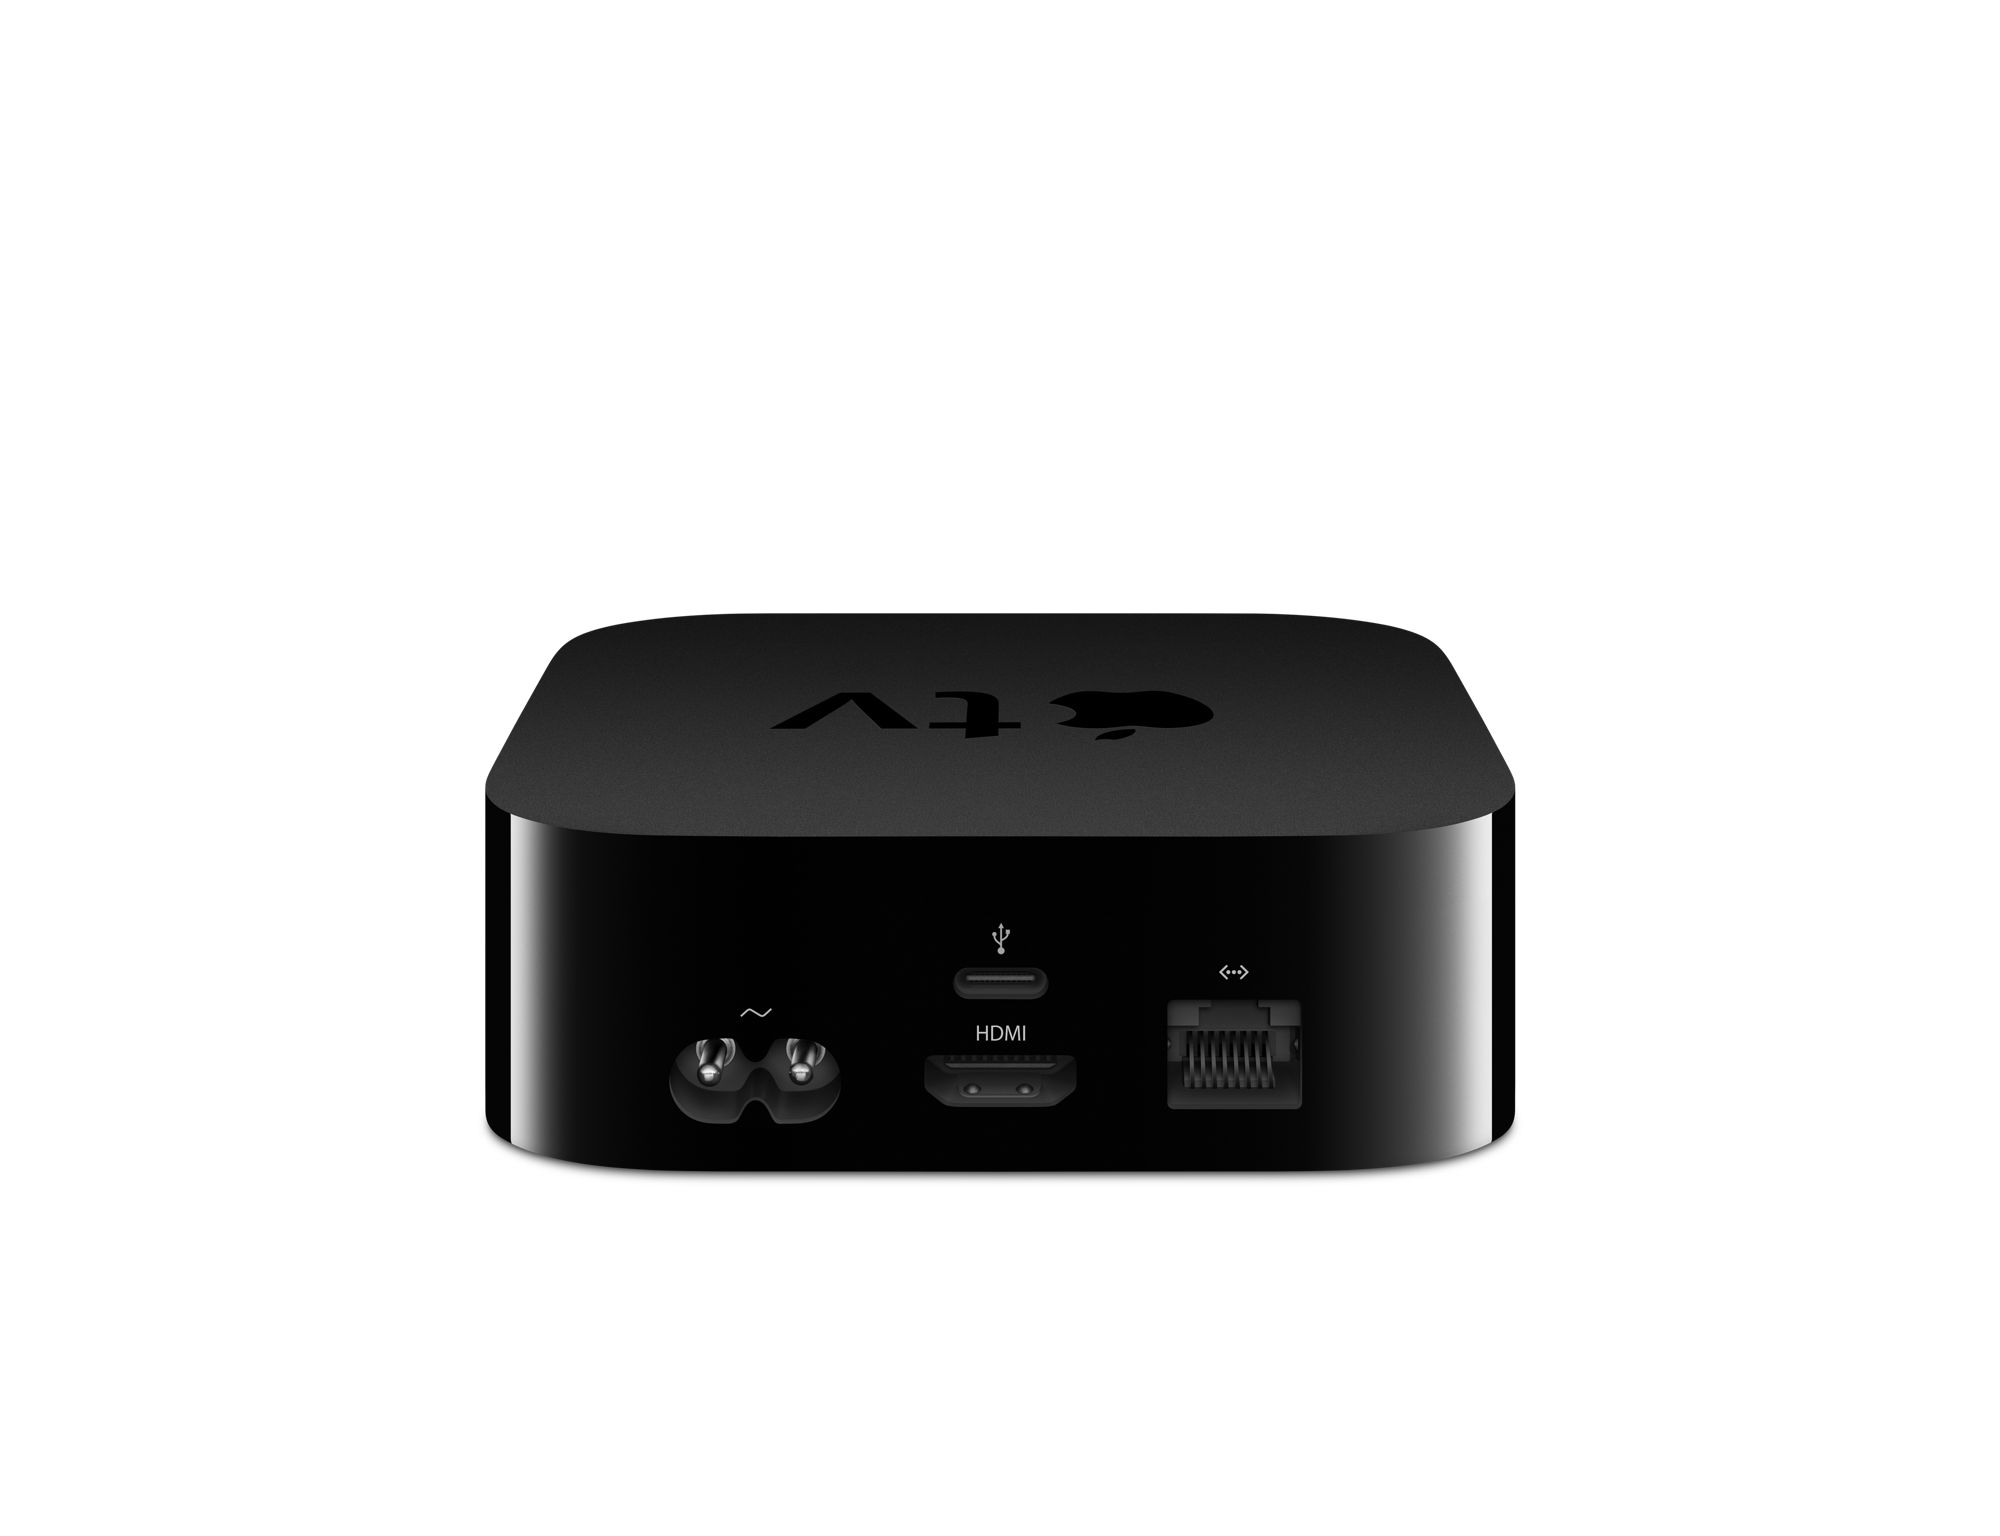 Indsigtsfuld Menagerry Globus Rohan Naravane on Twitter: "Apple TV has a USB Type C port at the back, but  comes with a Lightning to Standard USB cable to charge the remote.  https://t.co/oECiQJ1pPW" / Twitter